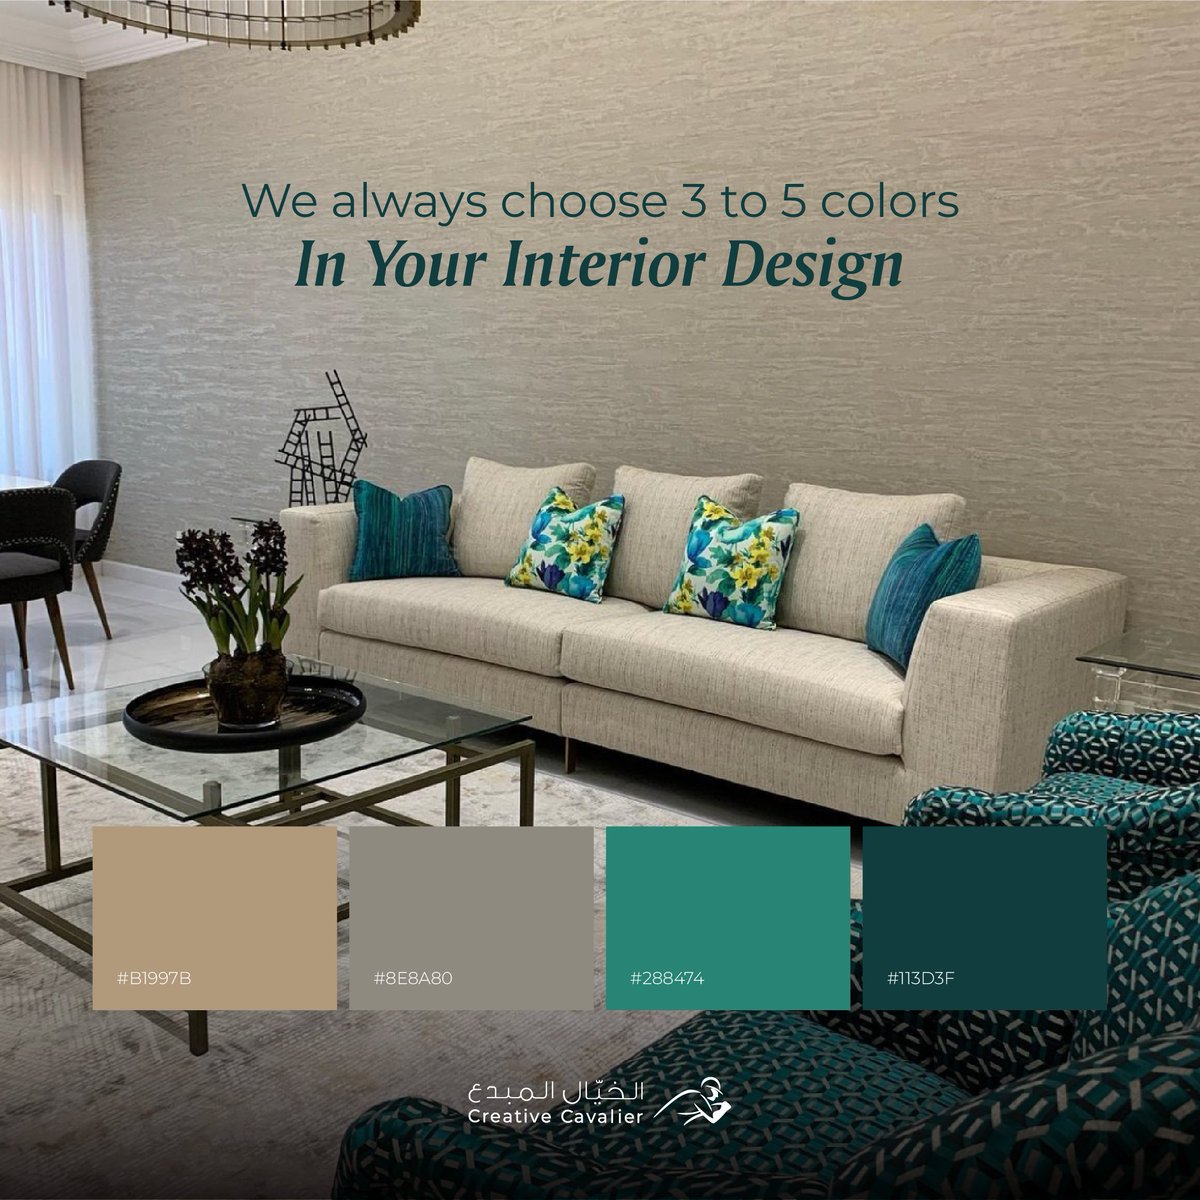 Interior design mistakes that might happen are choosing light colors for all the house, but which we could easily avoid!

#creativecavalier #interiordesign #colorpallet #interiorcolors #ksa #jeddah #riyadh #dammam #khobar #madinah #abha